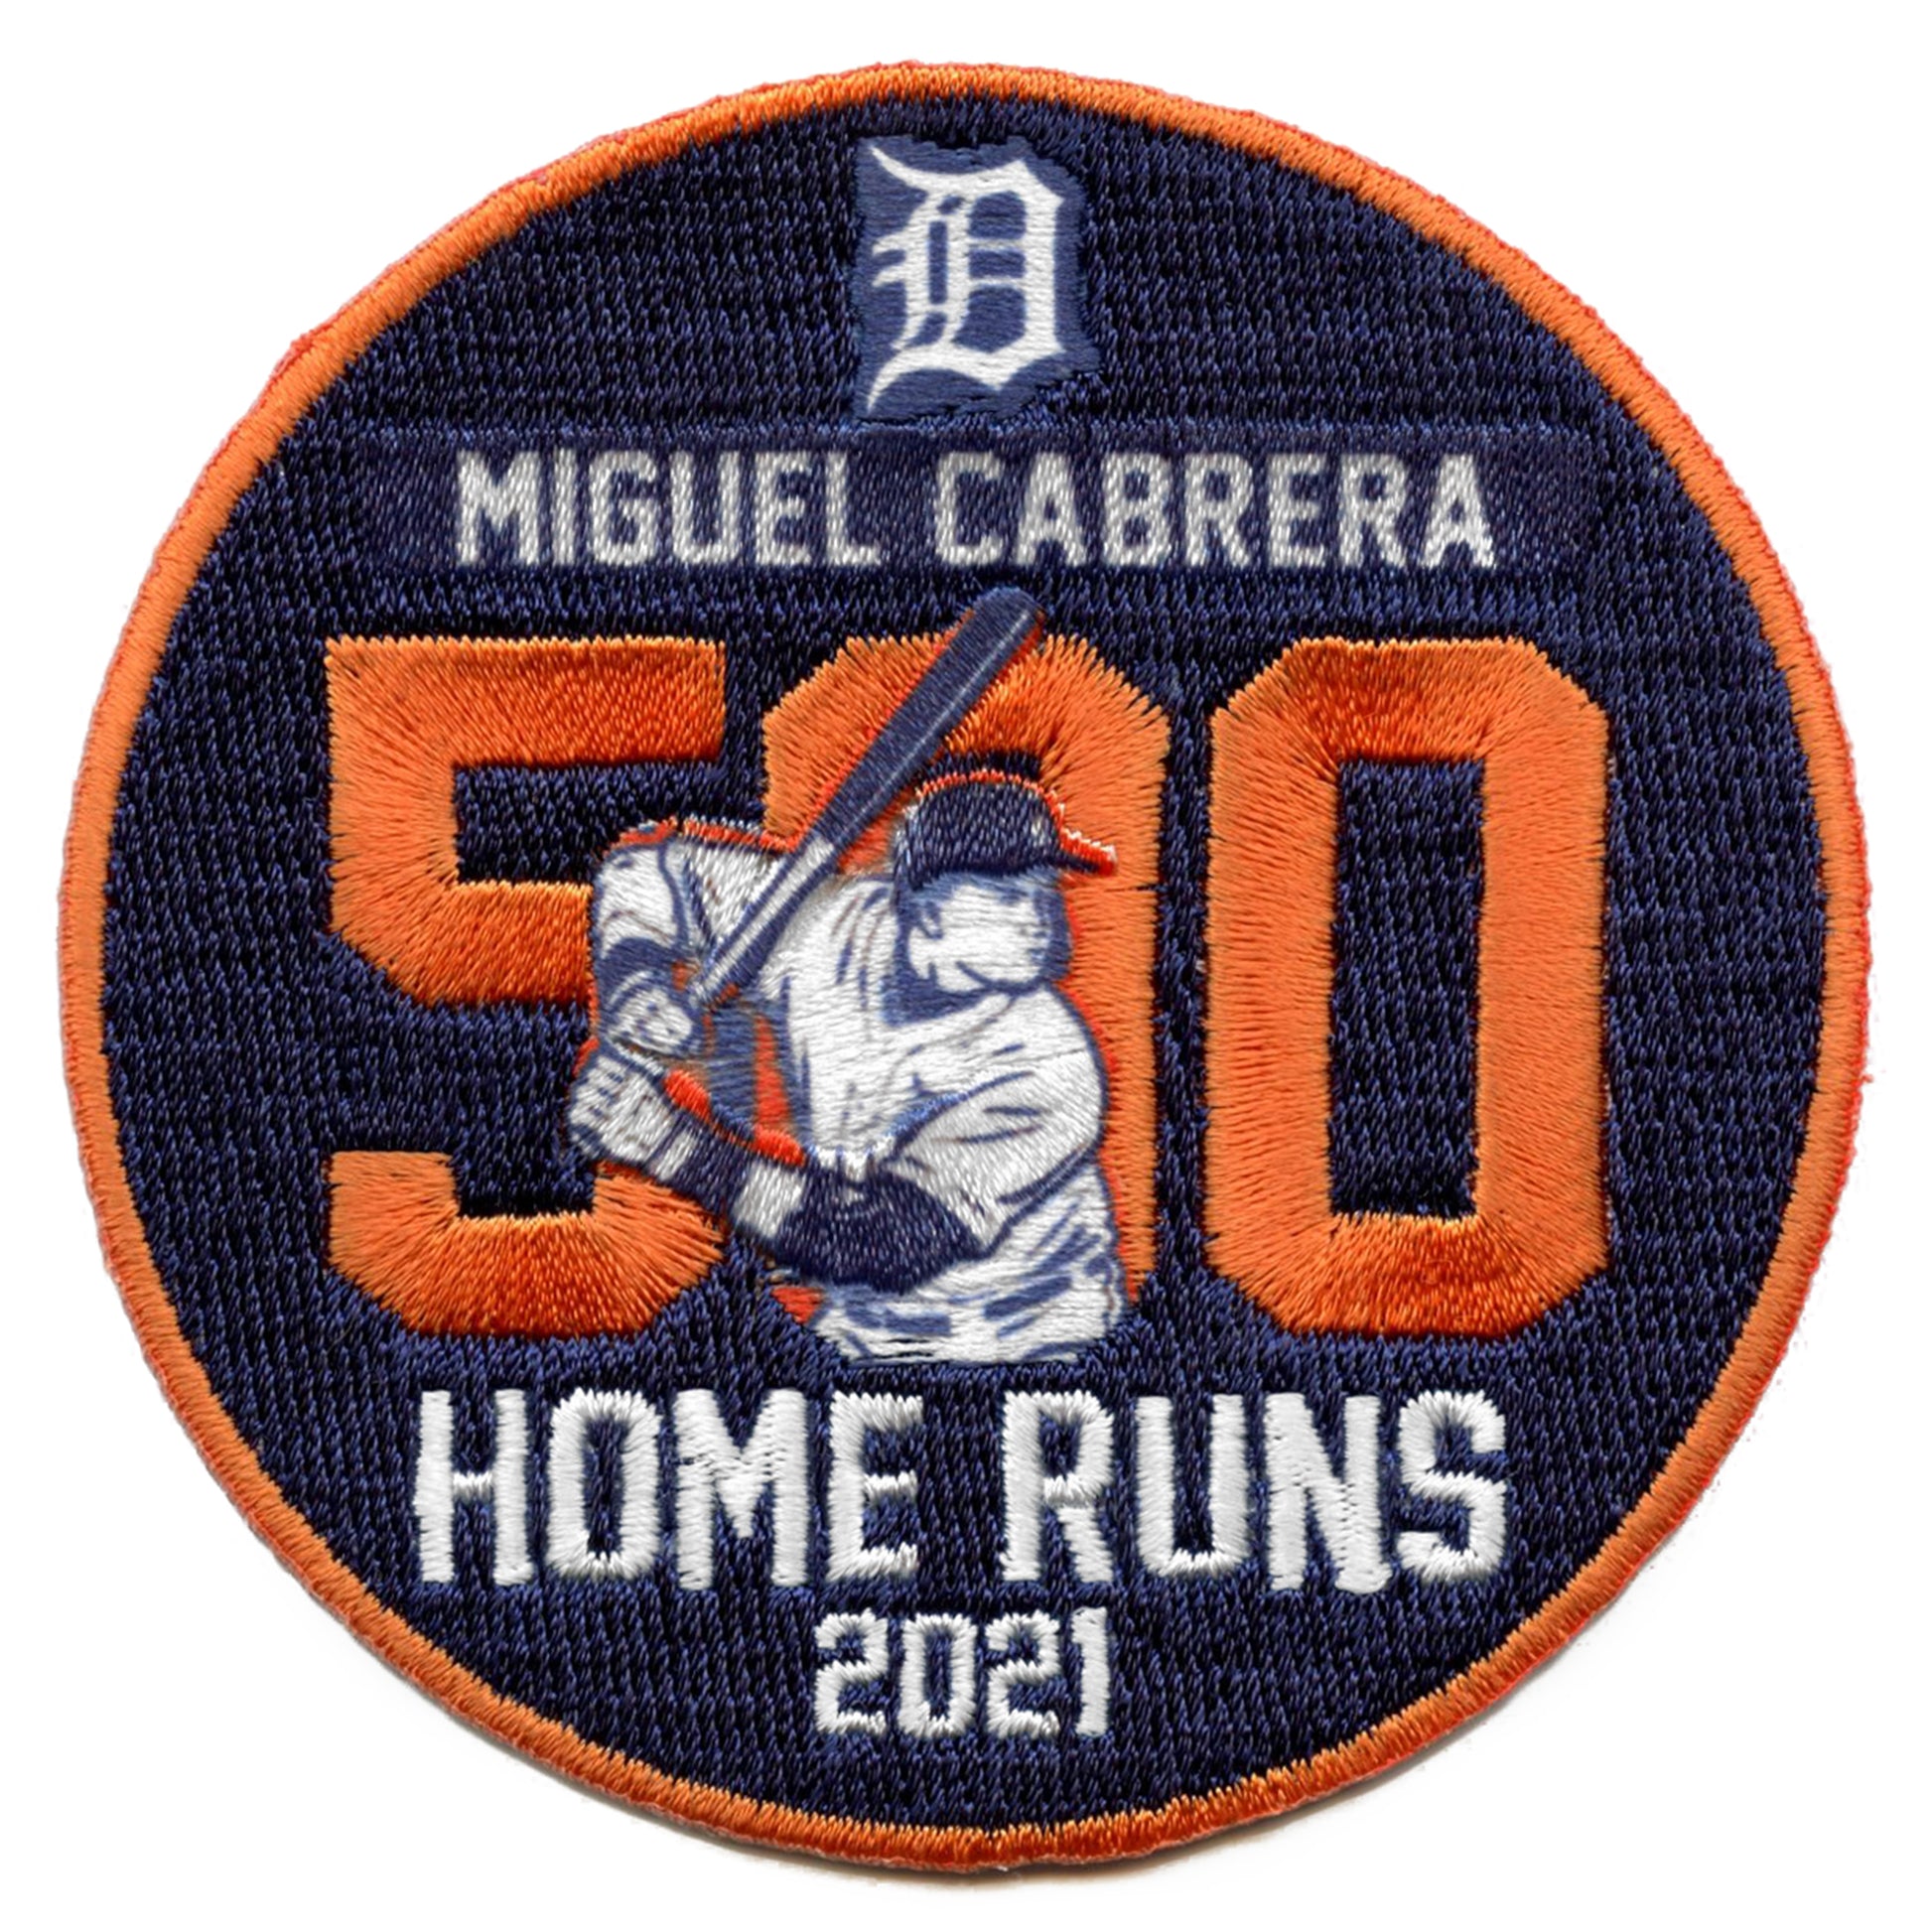 Miguel Cabrera player worn jersey patch baseball card (Detroit